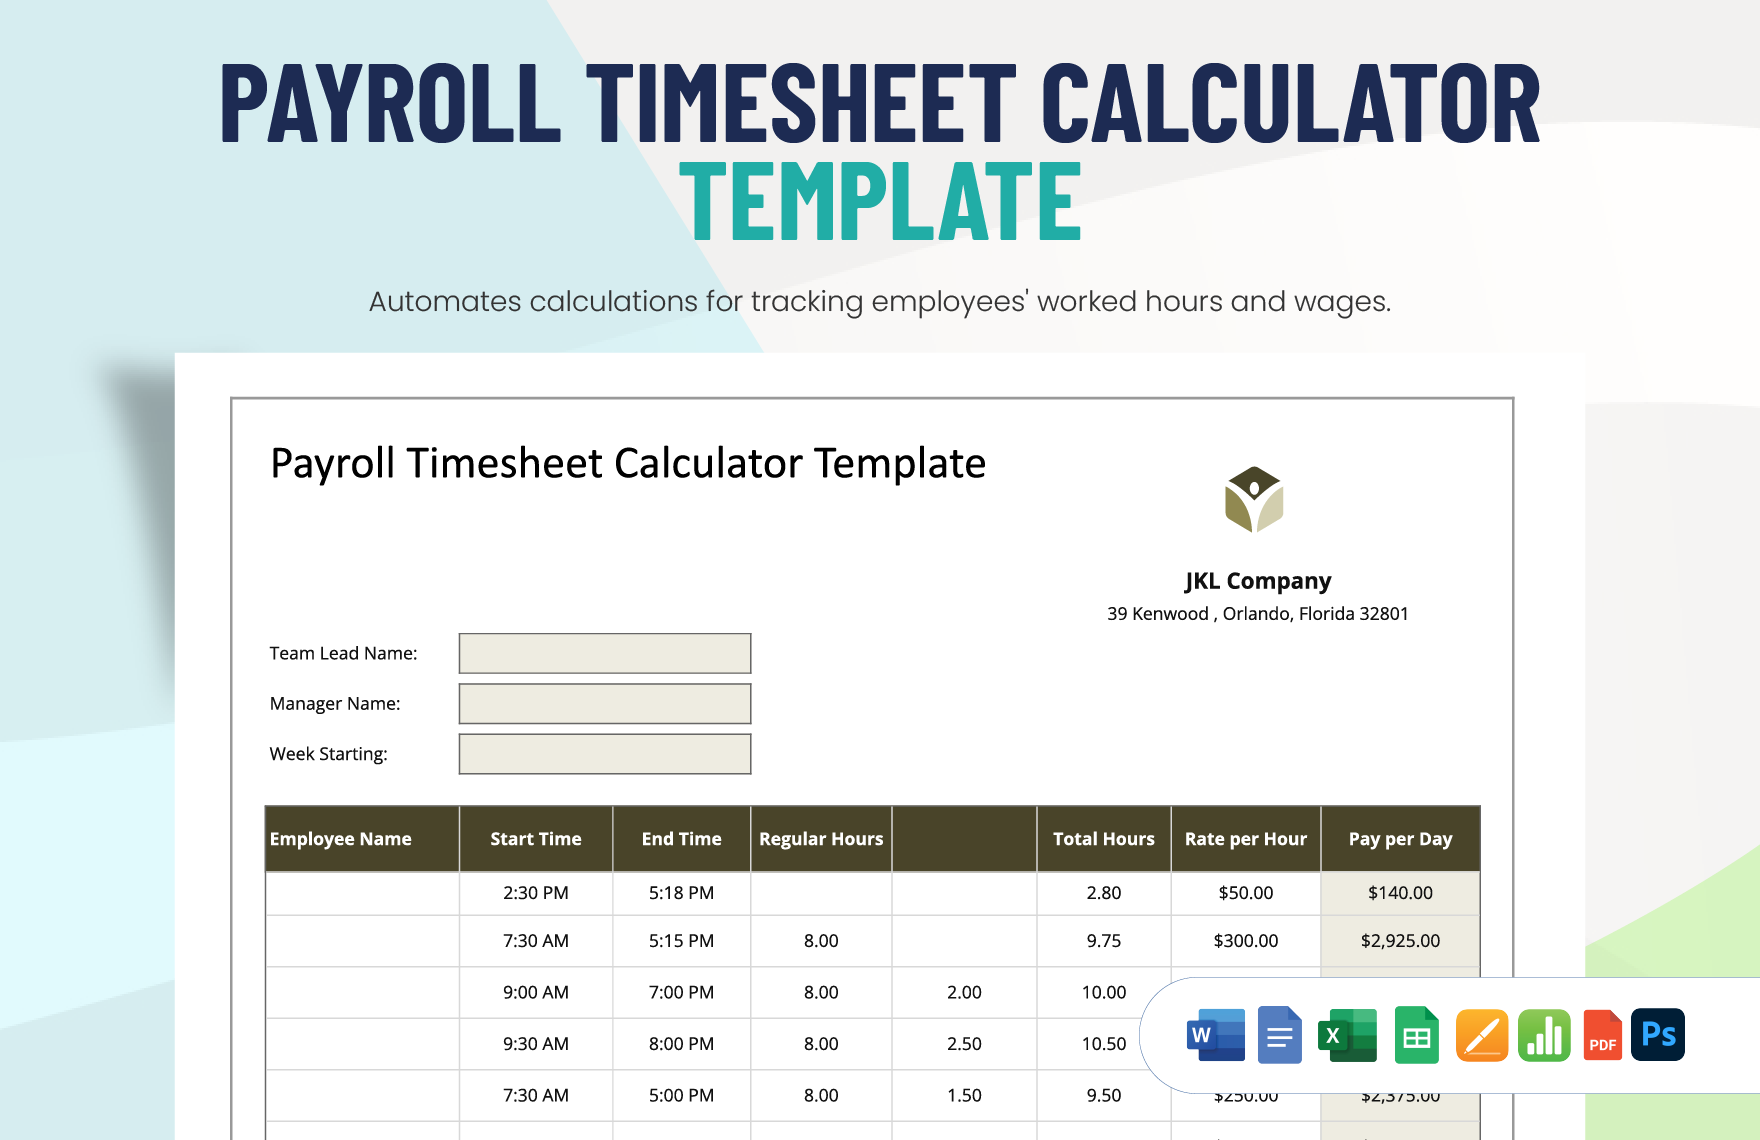 Free Payroll Timesheet Calculator Template in Word, Google Docs, Excel, PDF, Google Sheets, PSD, Apple Pages, Apple Numbers